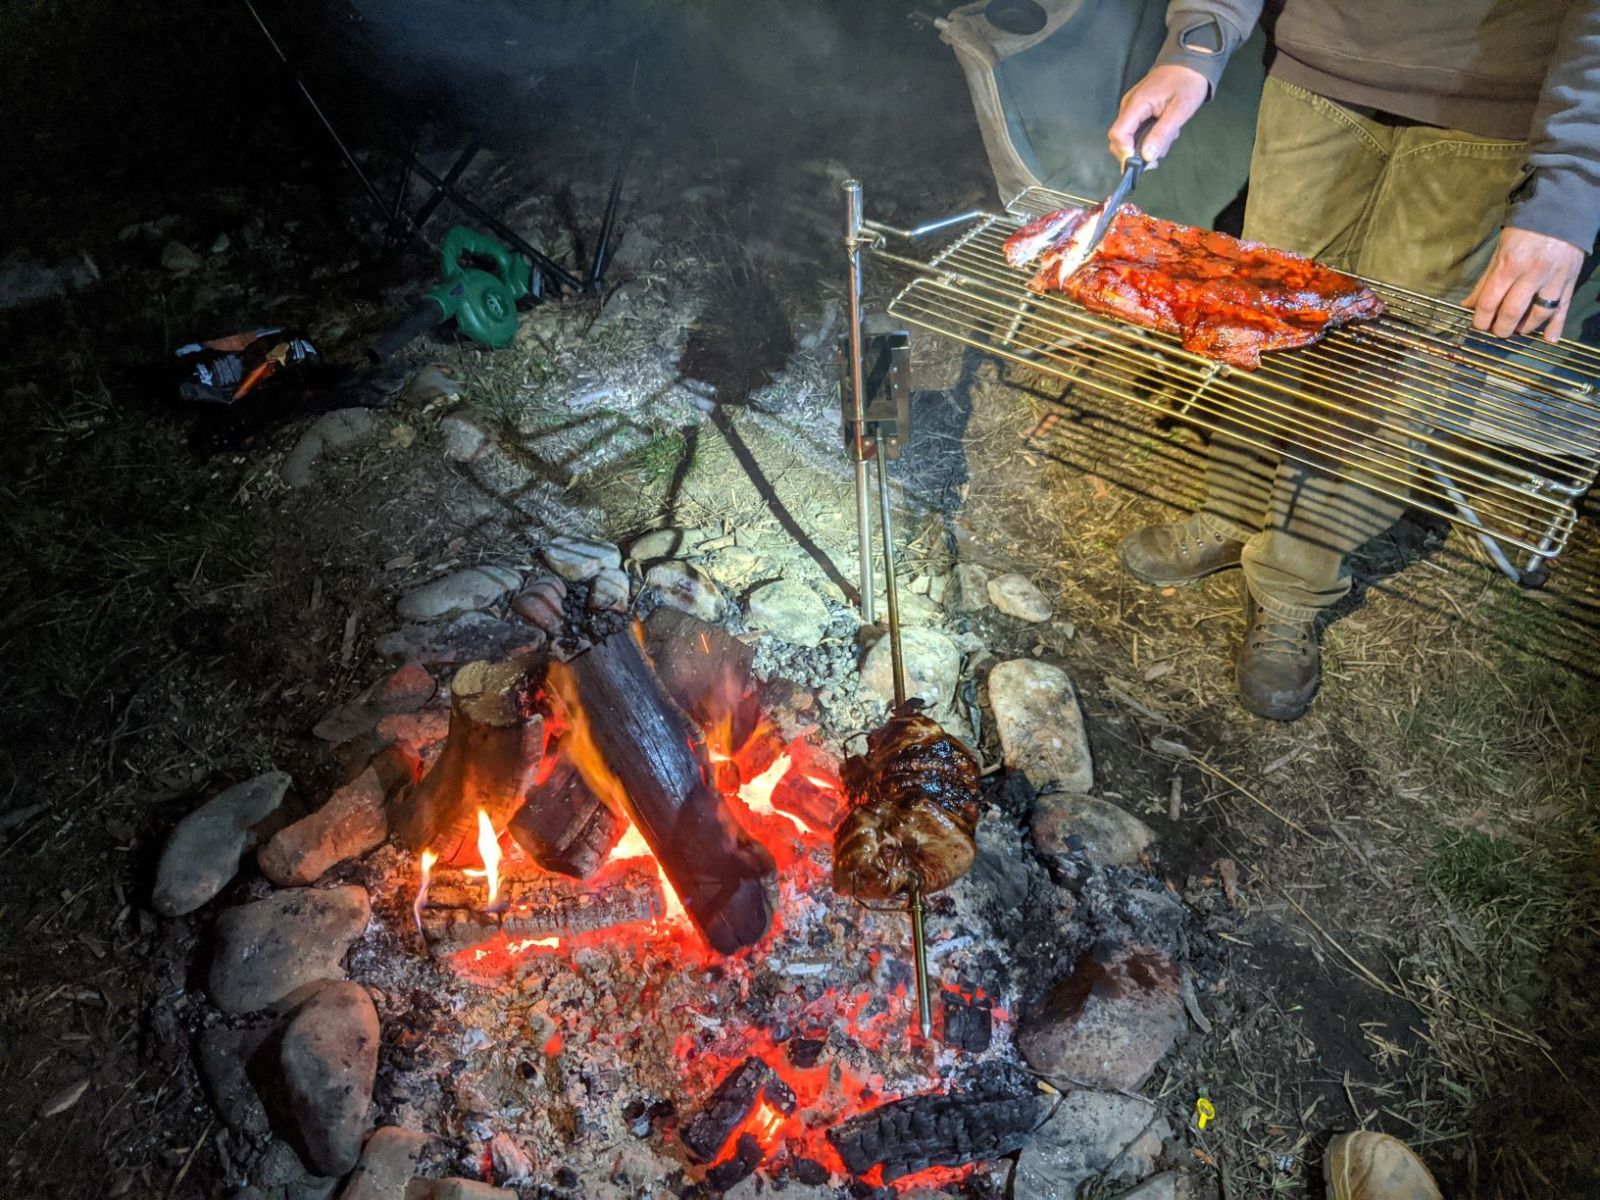 This image show the stainless steel folding camp grill being used as a carving tray. you can also see in the photo a spit roast cooking over a campfire